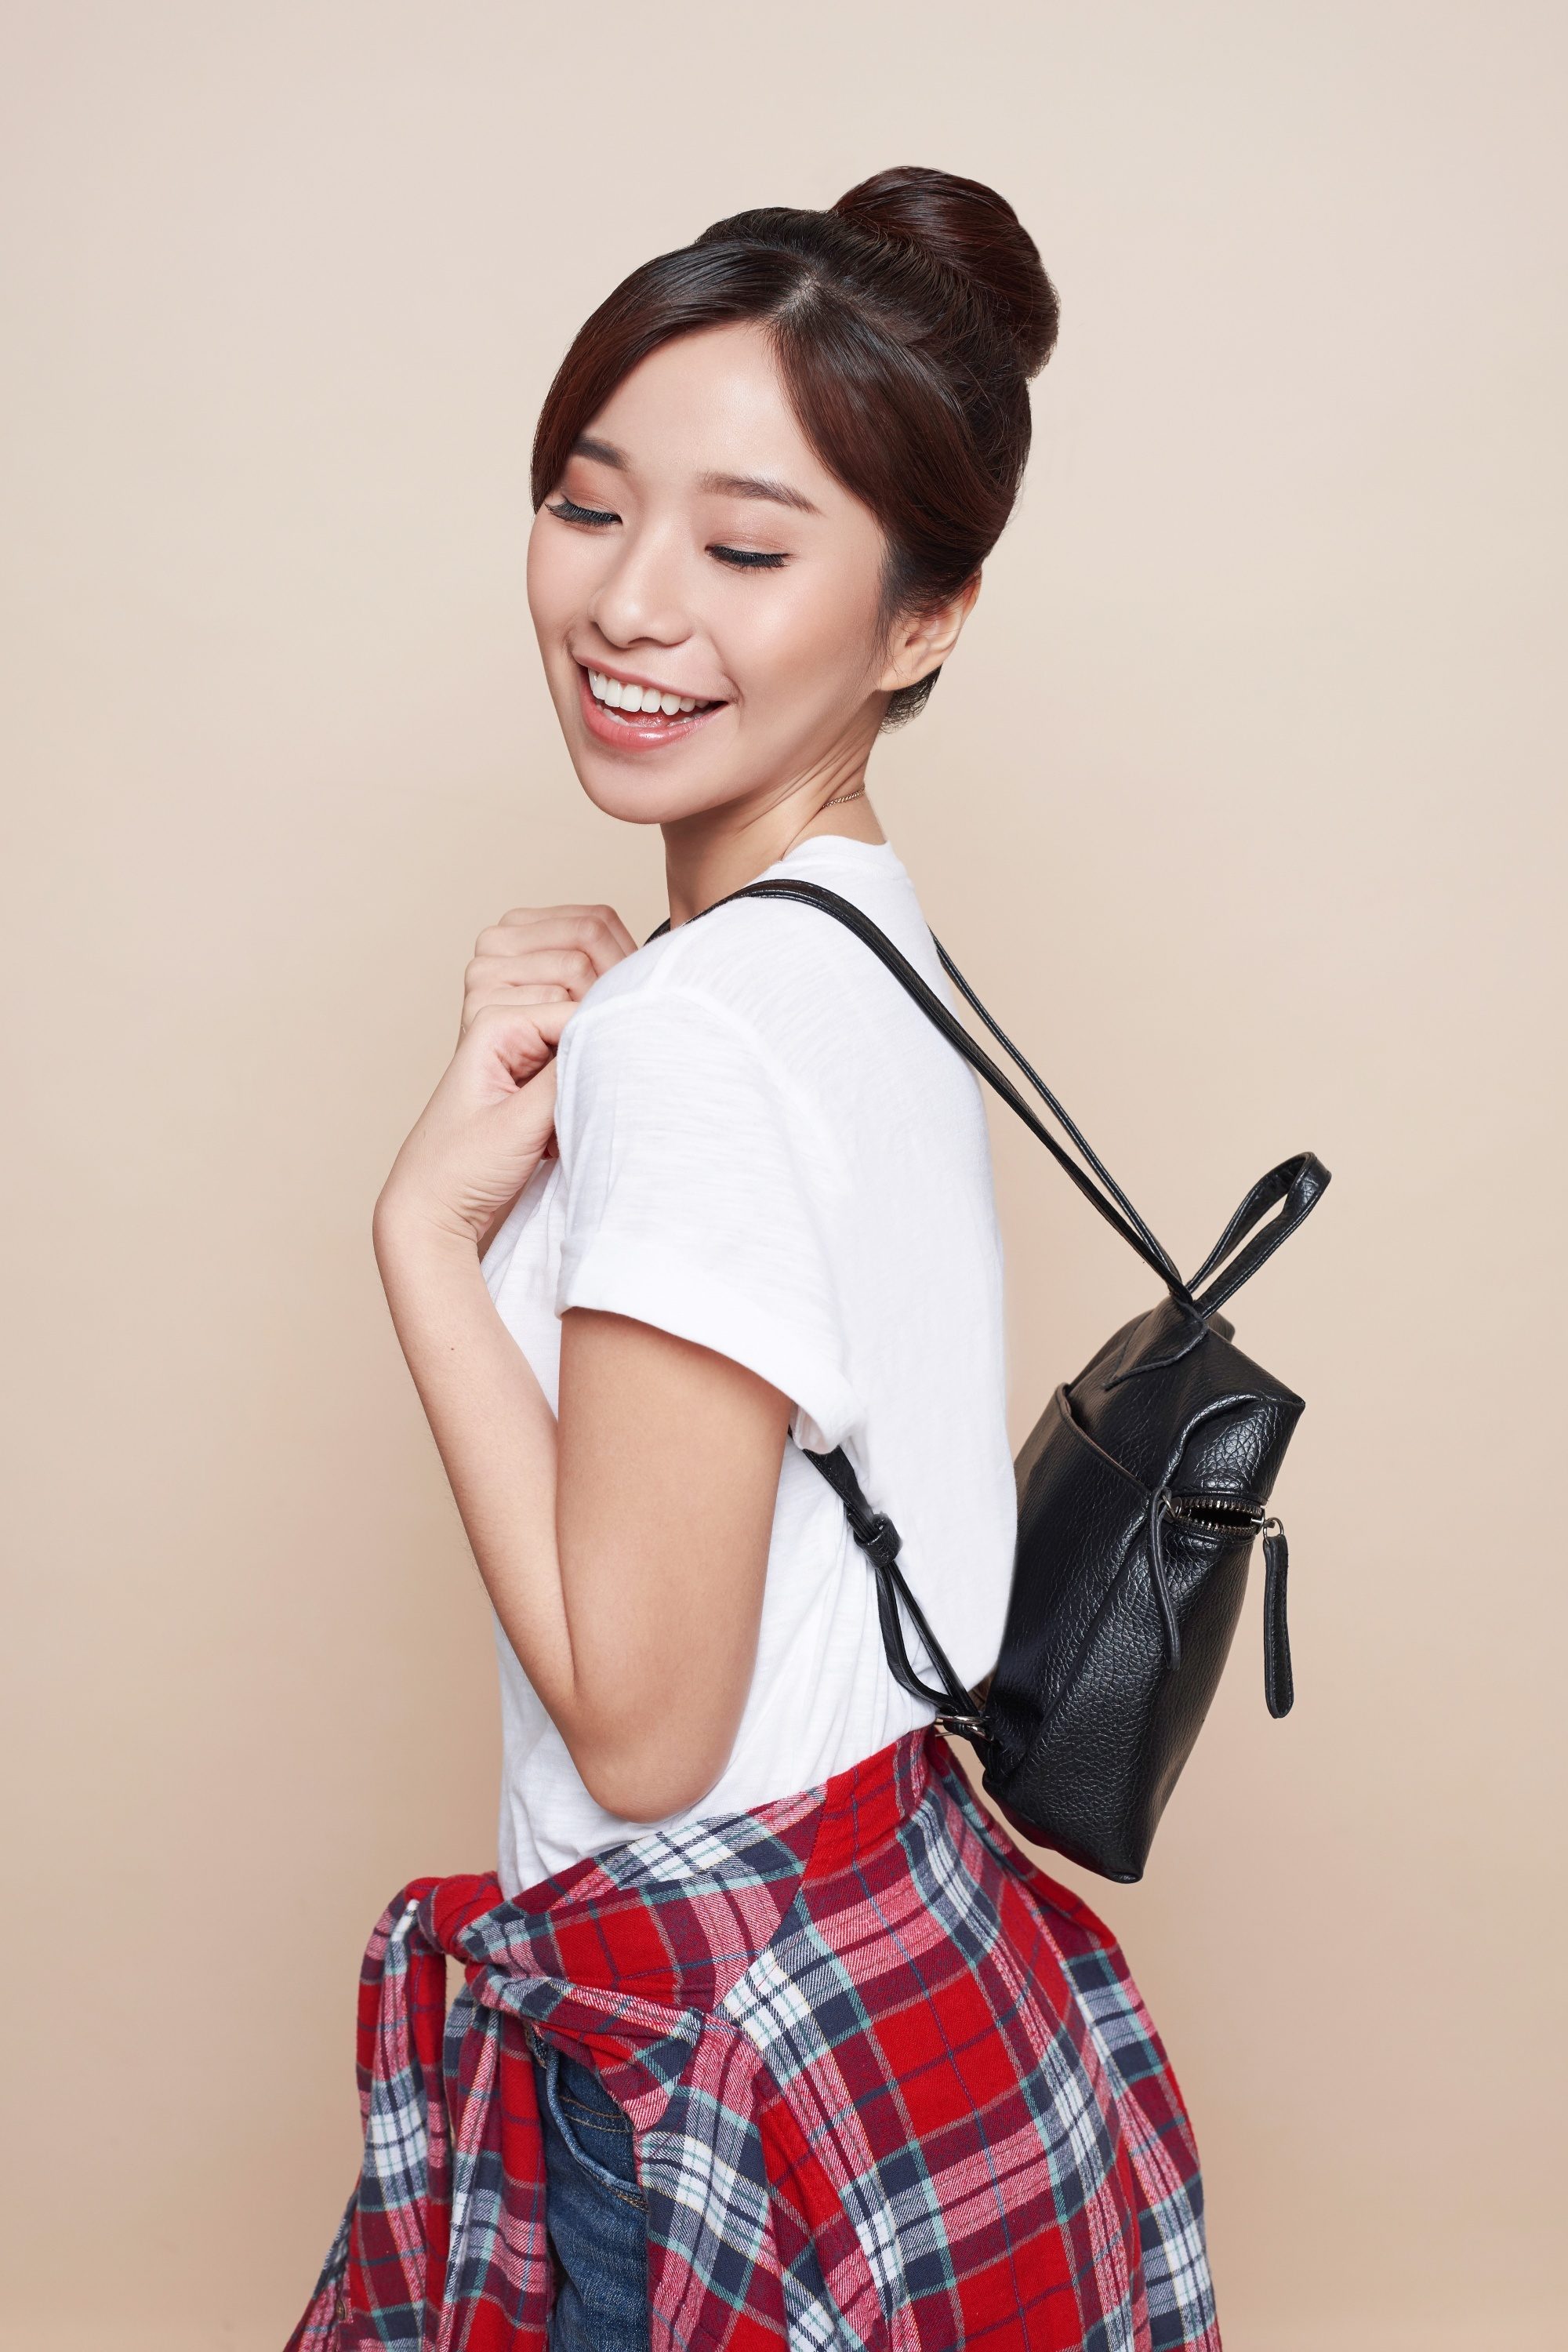 Asian woman with a hair donut wearing a white shirt carrying a black leather backpack